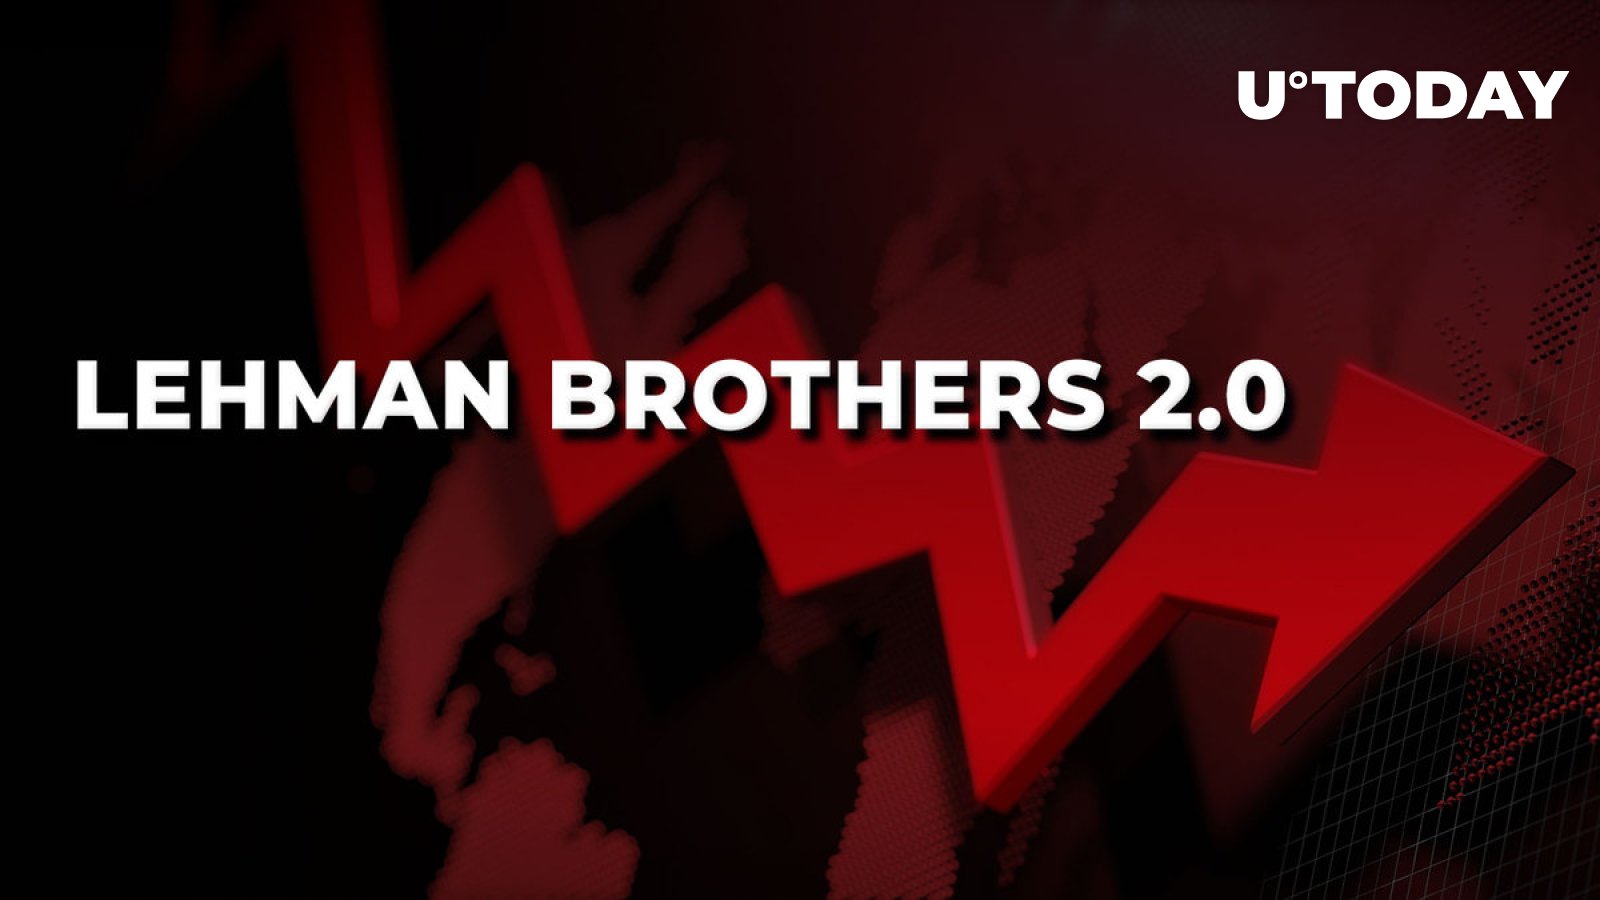 Lehman Brothers 2.0 Situation May Cause Another Catastrophe on Crypto and Financial Markets